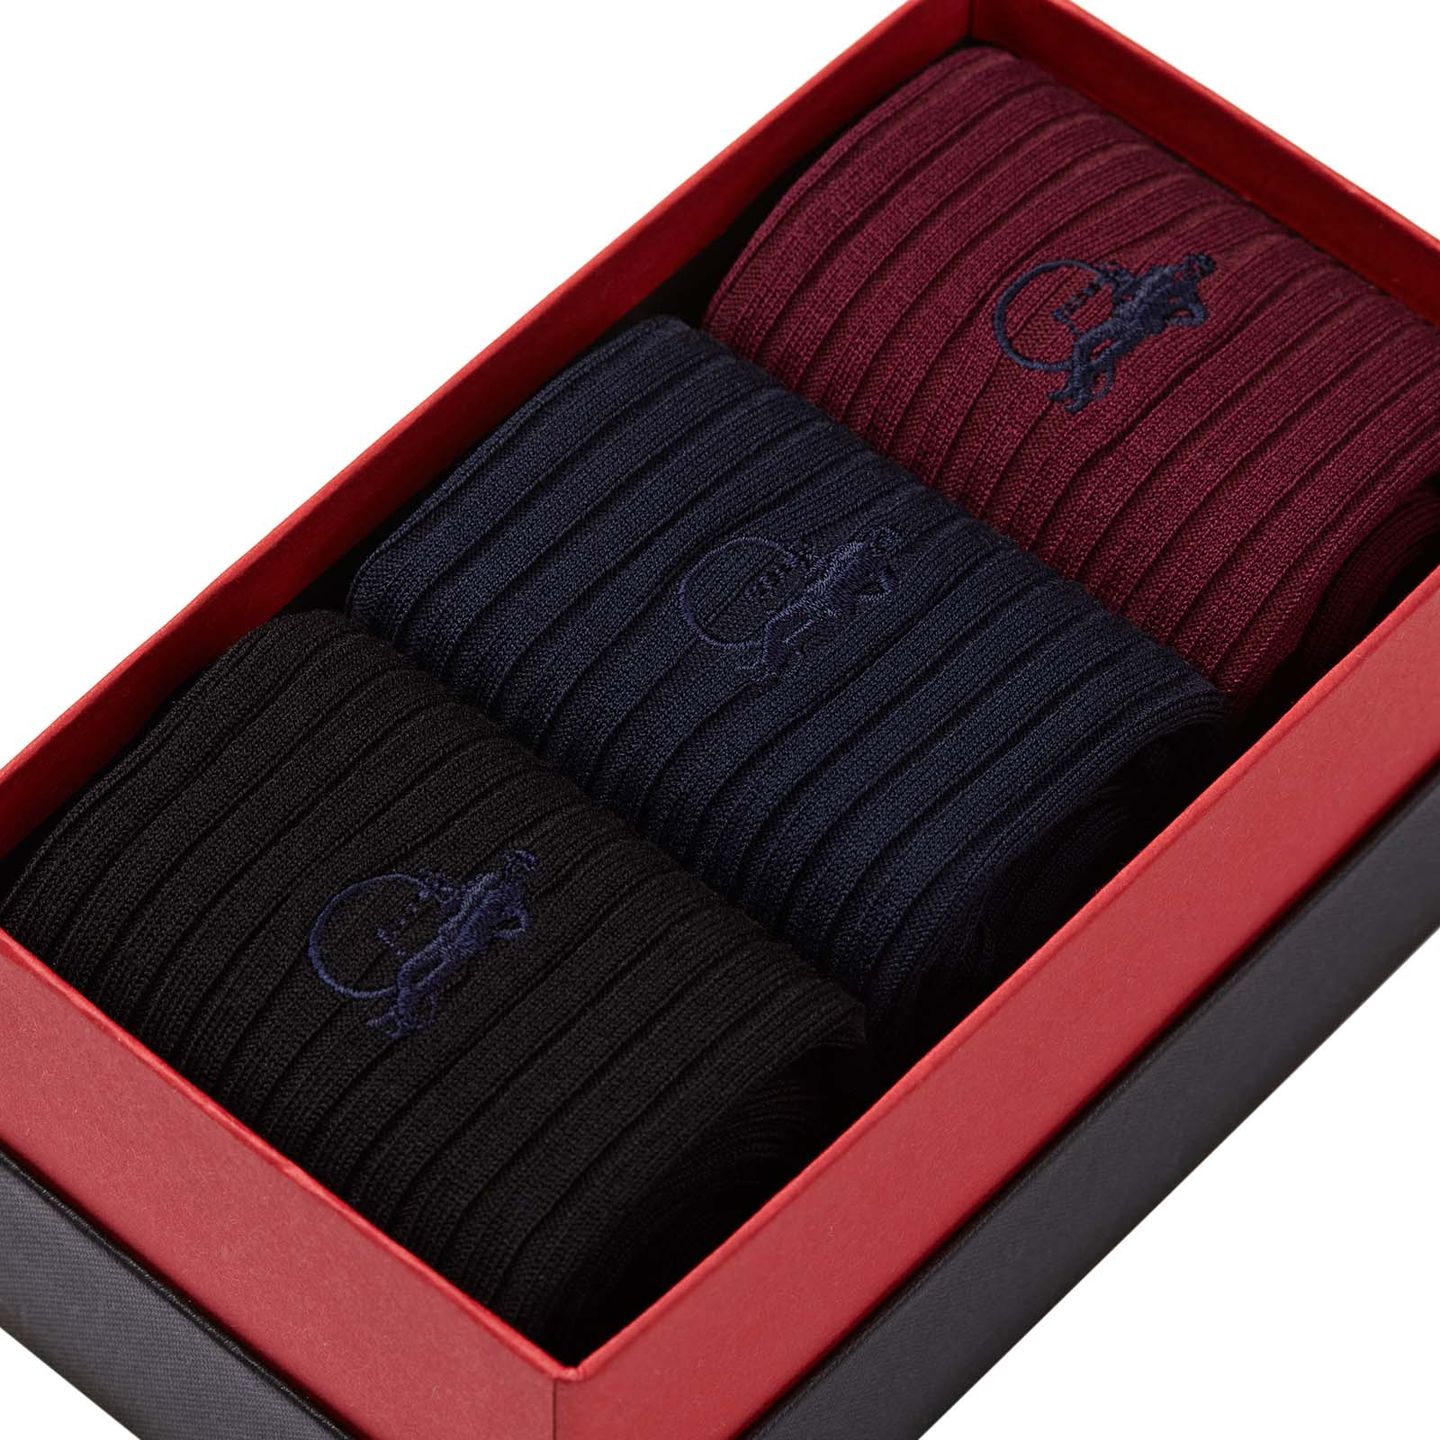 3 pairs of traditional socks in dark red, navy and black